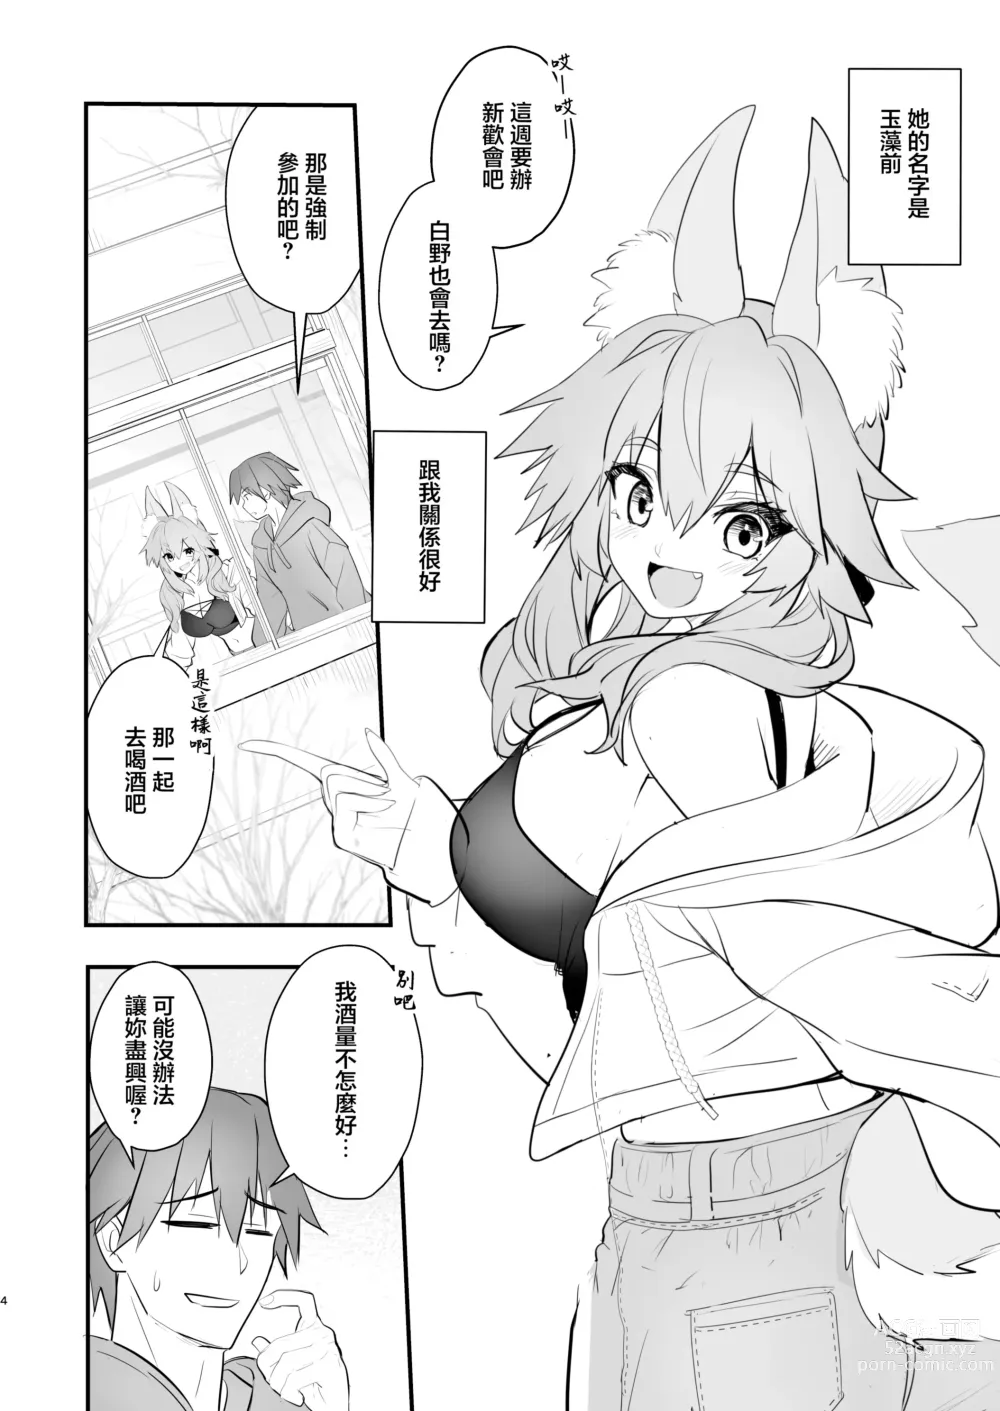 Page 3 of doujinshi 玉藻前大學物語